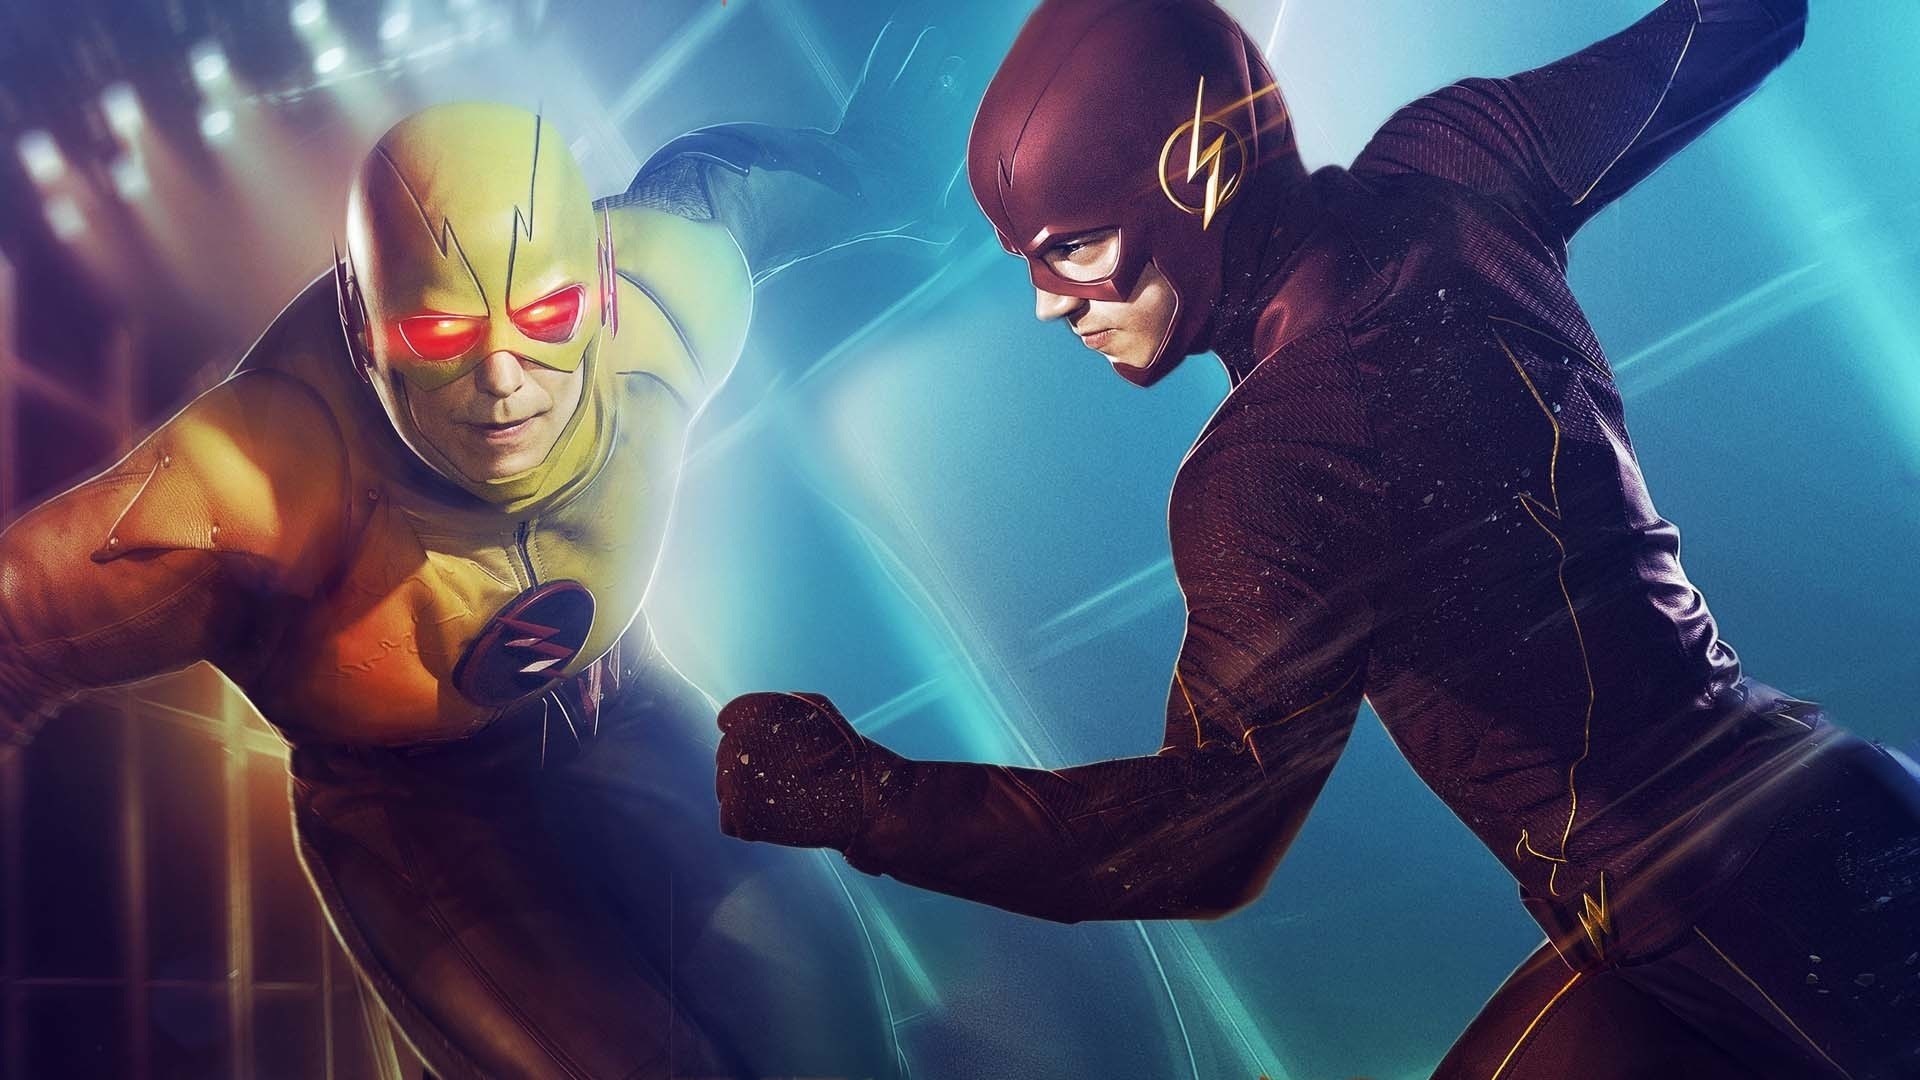 The Flash TV Series, High-quality wallpapers, HD backgrounds, Stunning visuals, 1920x1080 Full HD Desktop